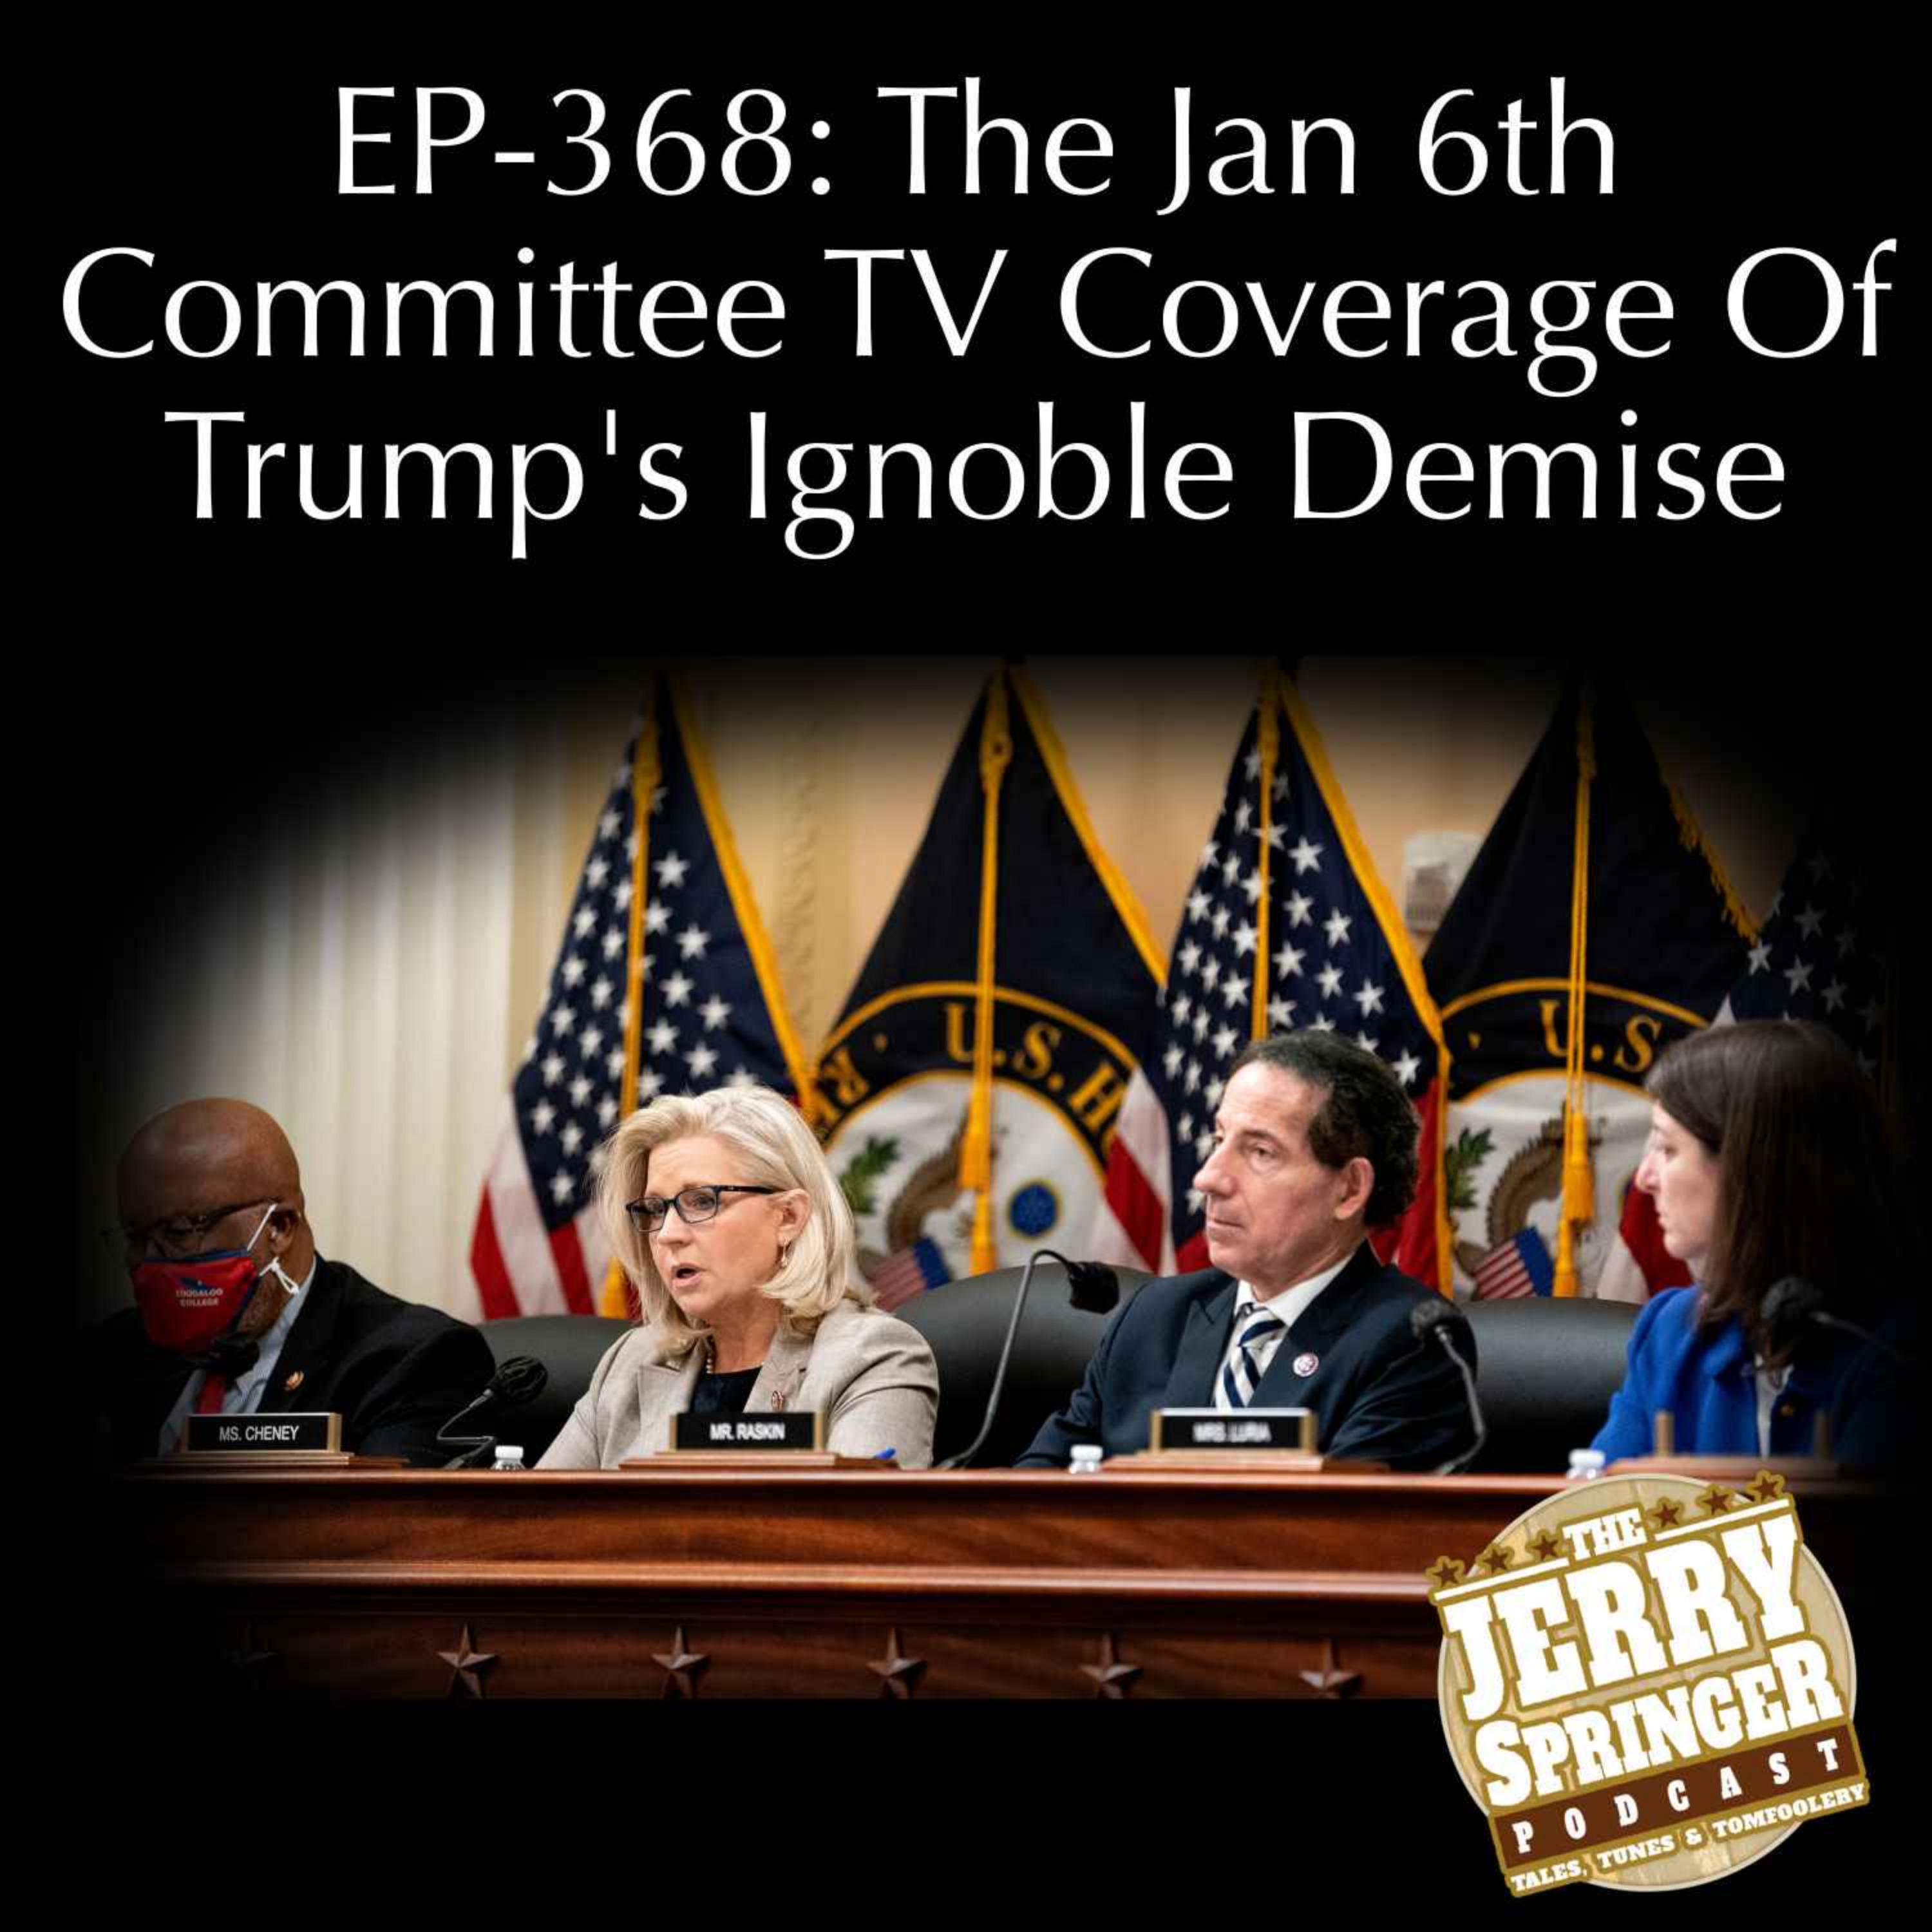 The Jan 6th Committee TV Coverage Of Trump's Ignoble Demise: EP - 368